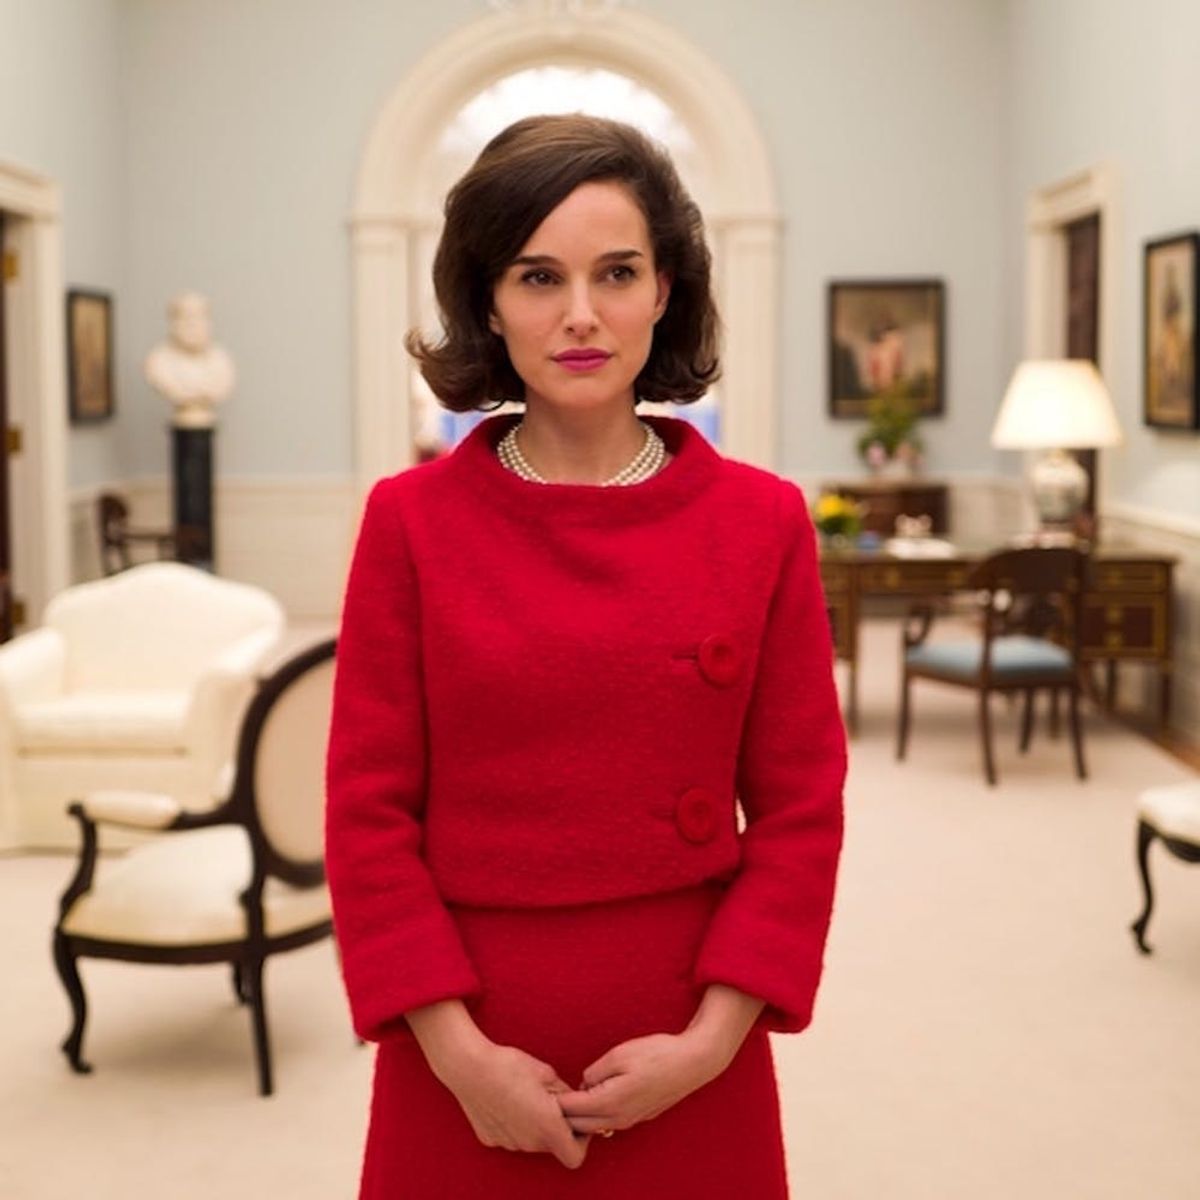 Morning Buzz! The First Jackie Trailer Is Here and Natalie Portman’s Jackie Kennedy Will Give You Chills + More